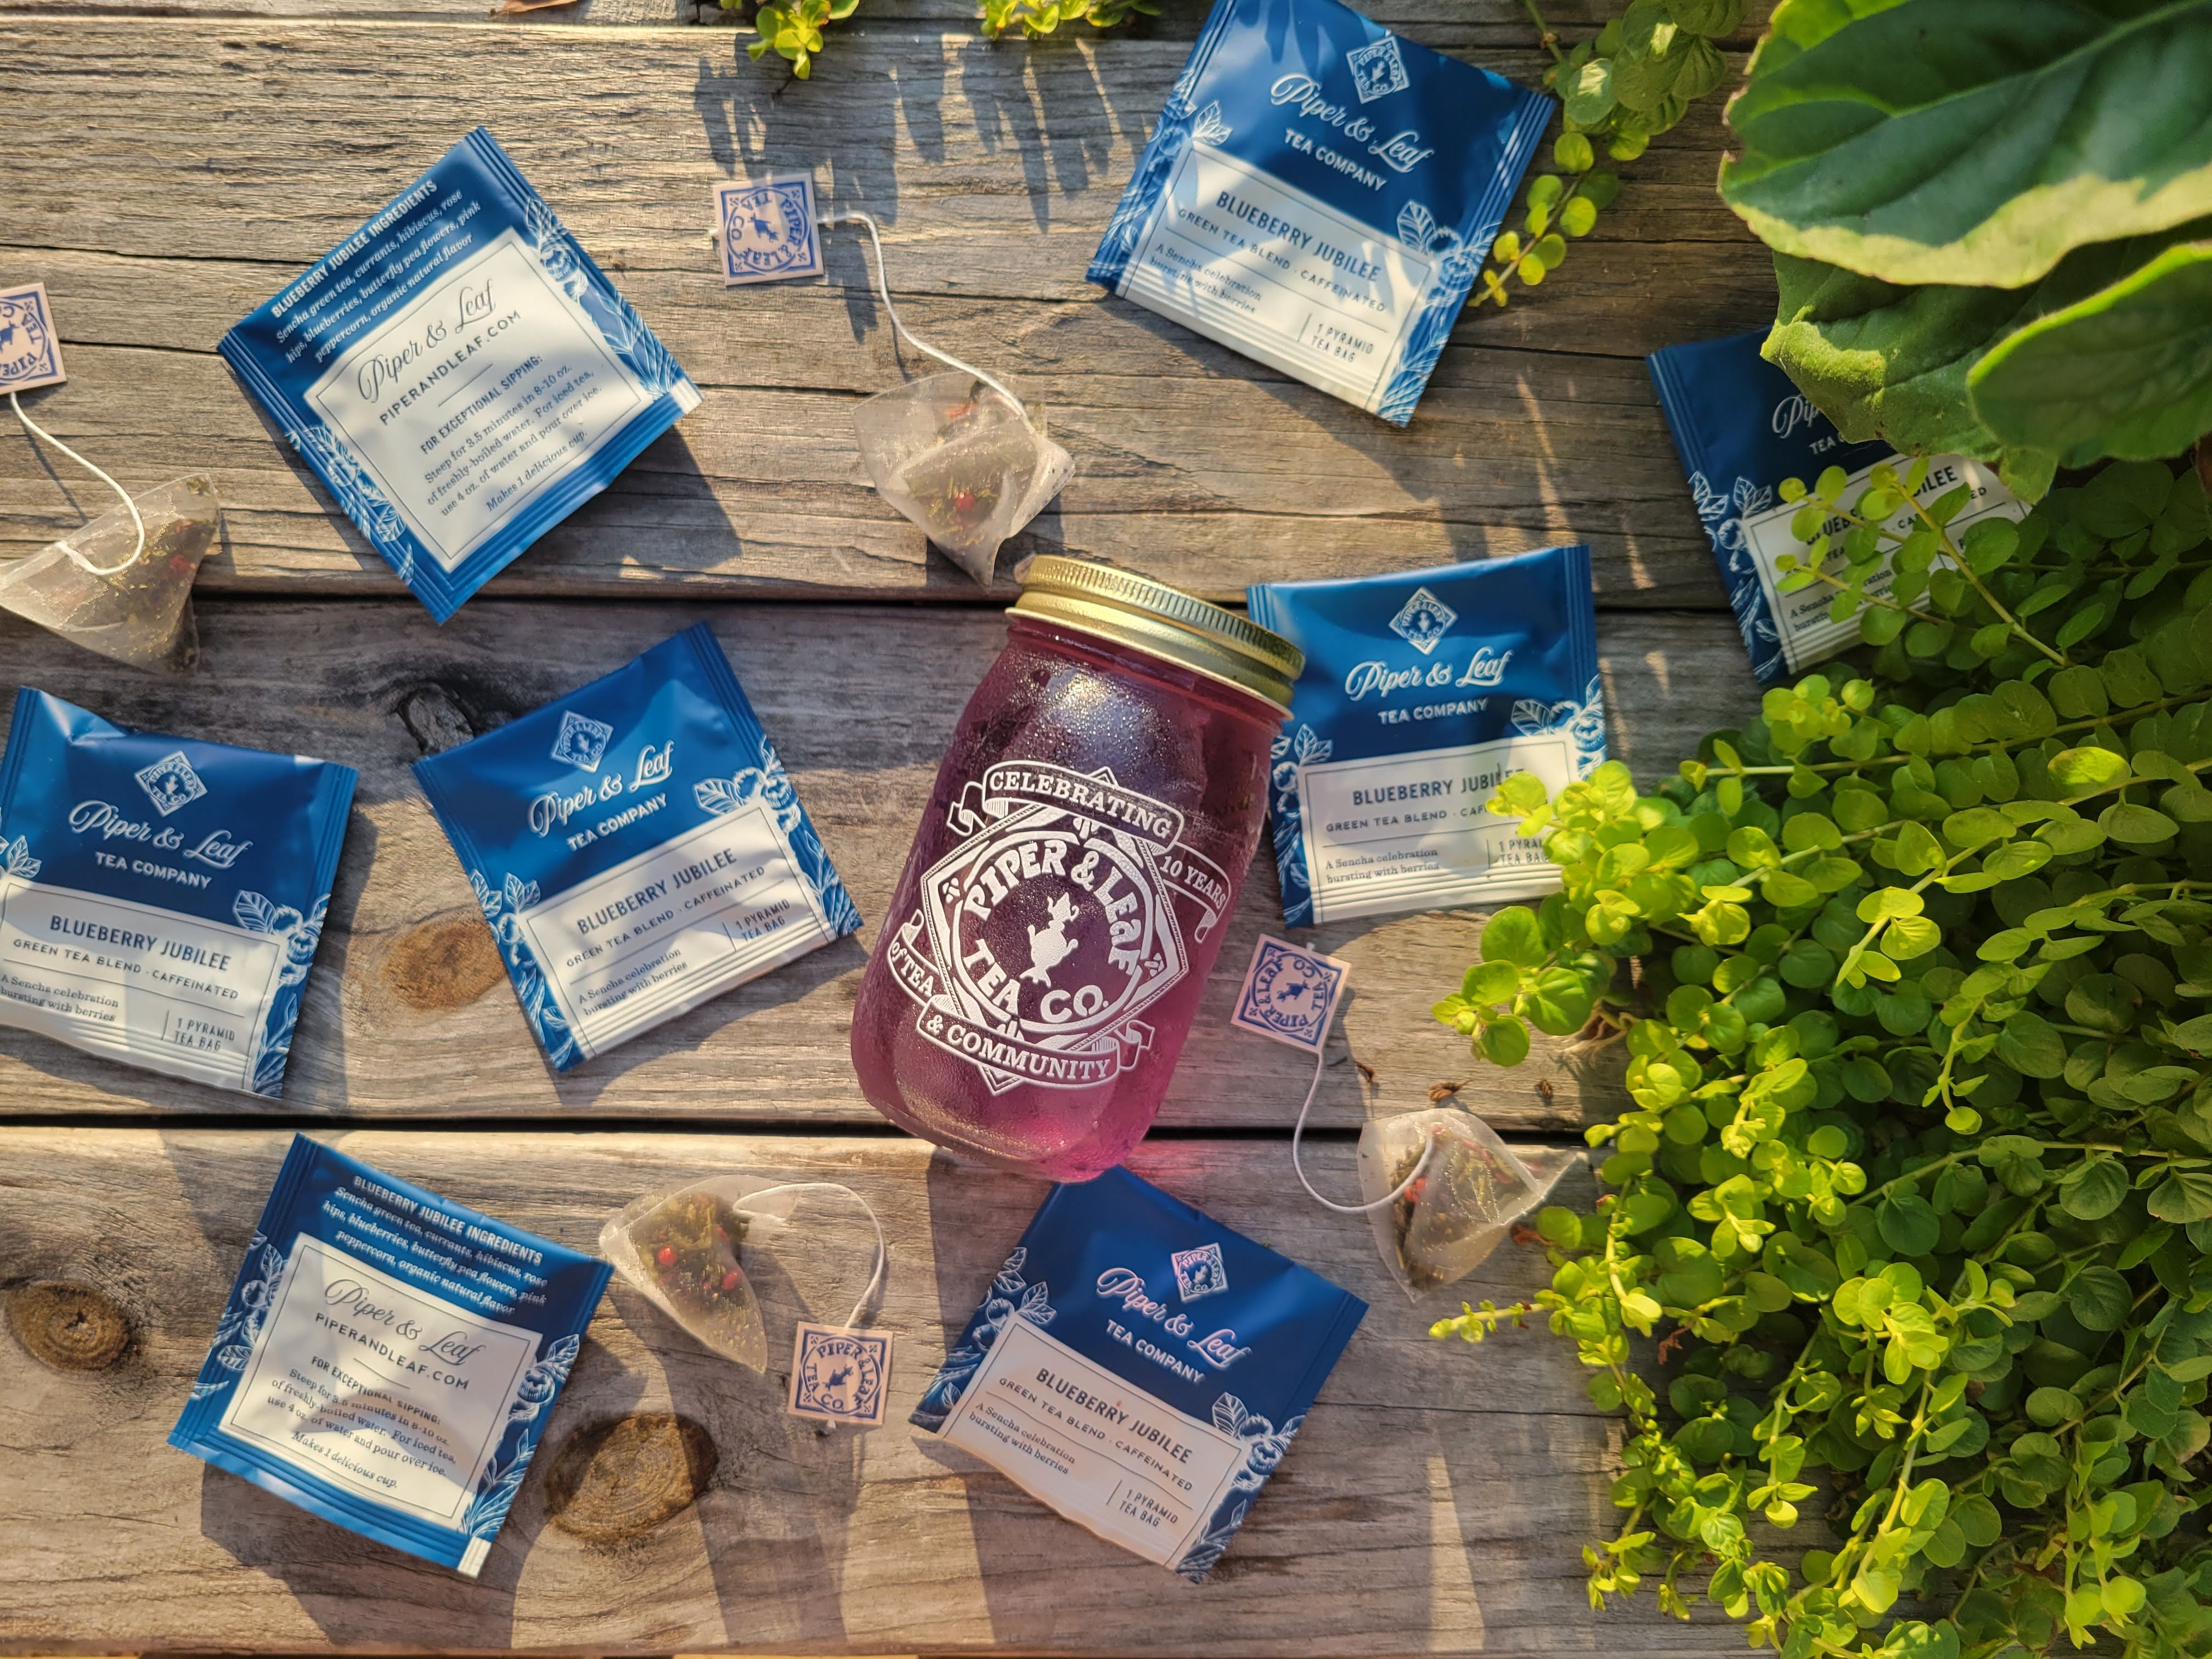 A jar of vibrant purple, iced Piper and Leaf, Blueberry jubilee tea sitting on a picnic table surrounded by individually wrapped tea bags of Blueberry Jubilee